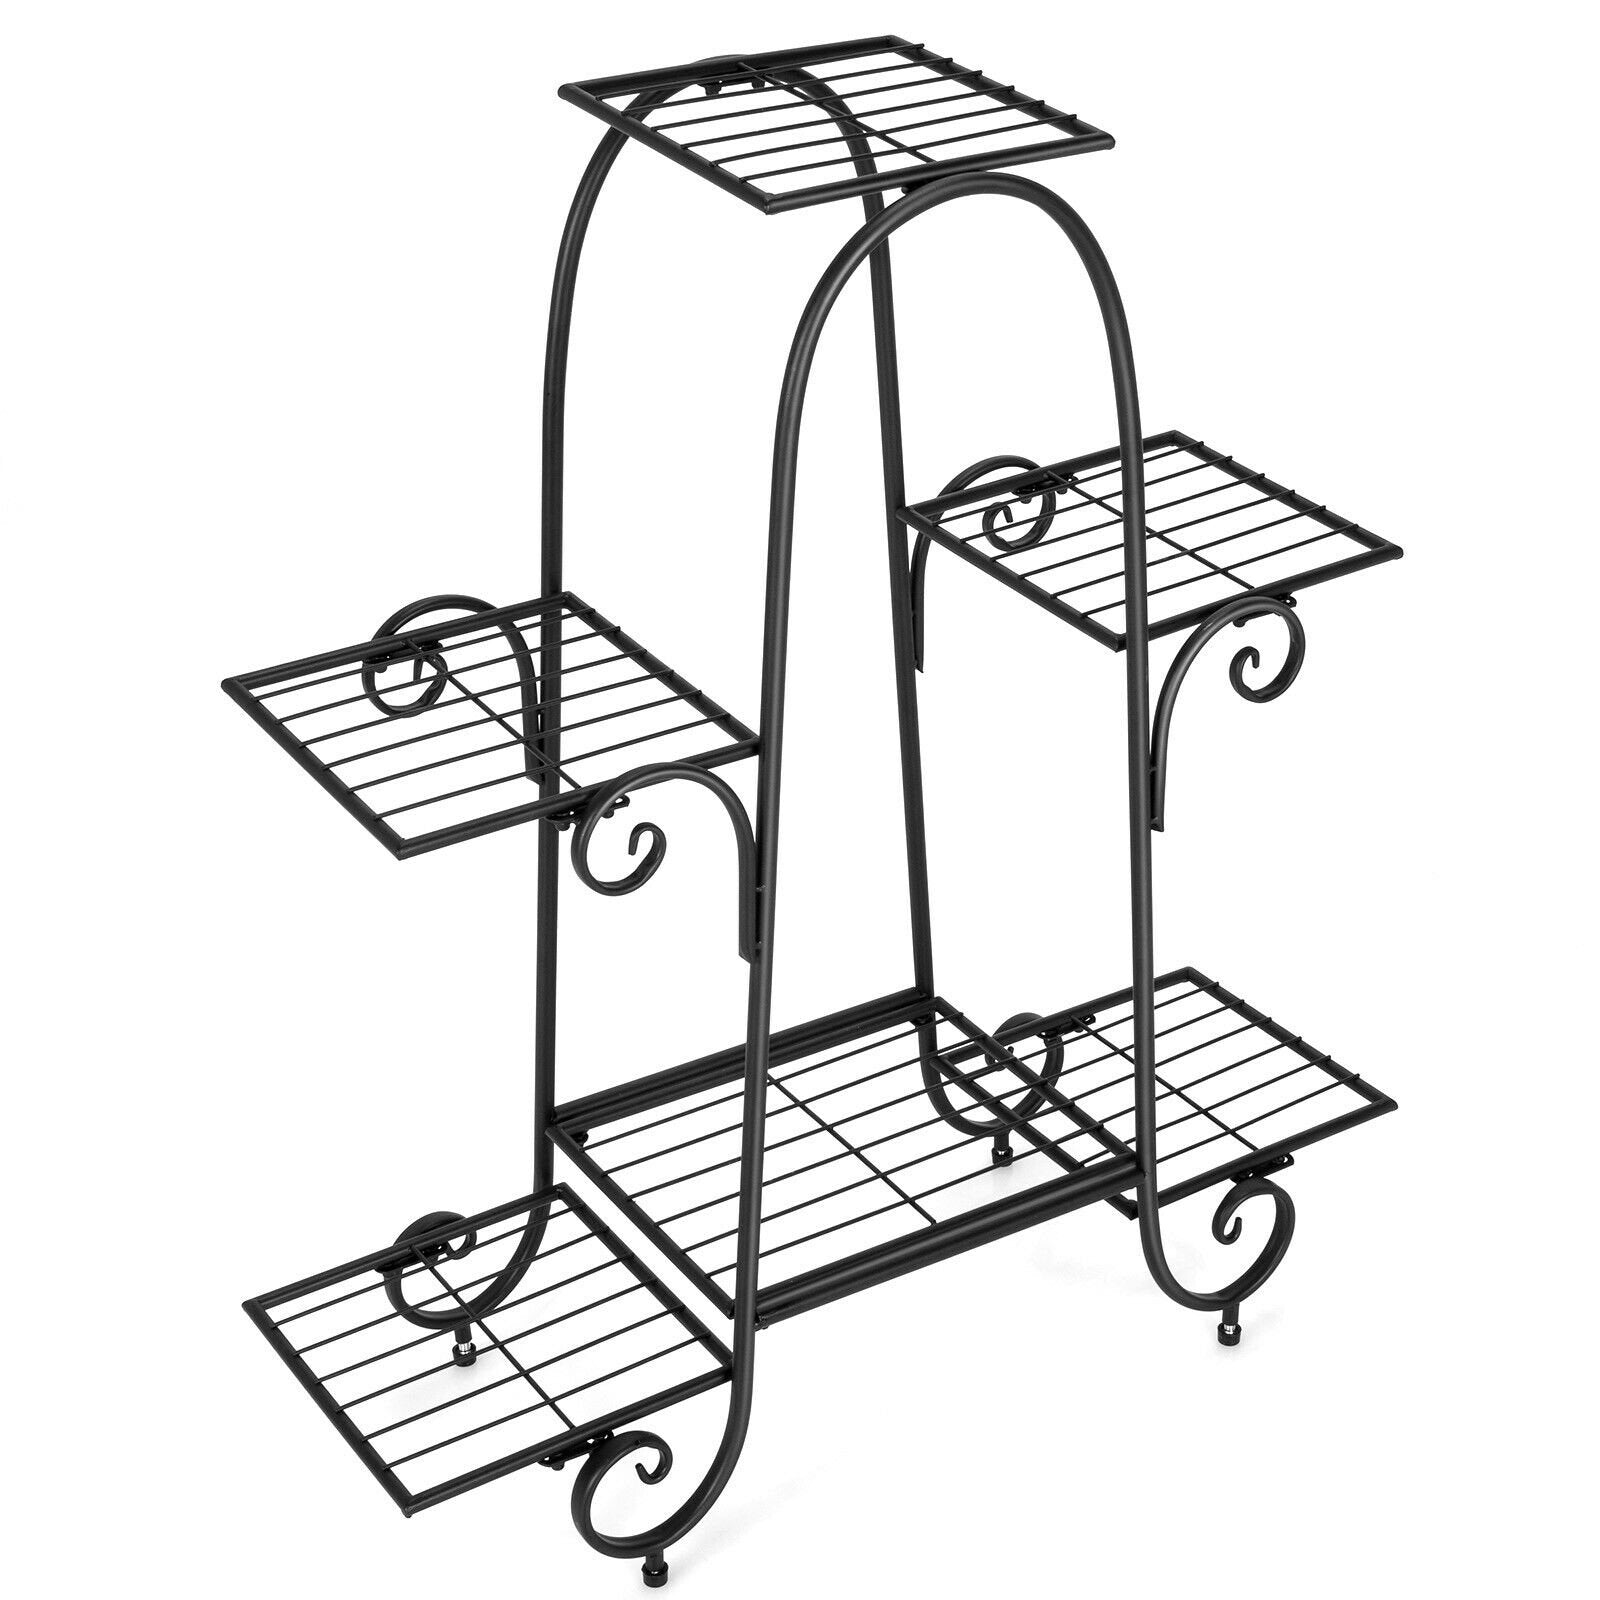 6-Tier Plant Stand with Adjustable Foot Pads, Black - Gallery Canada